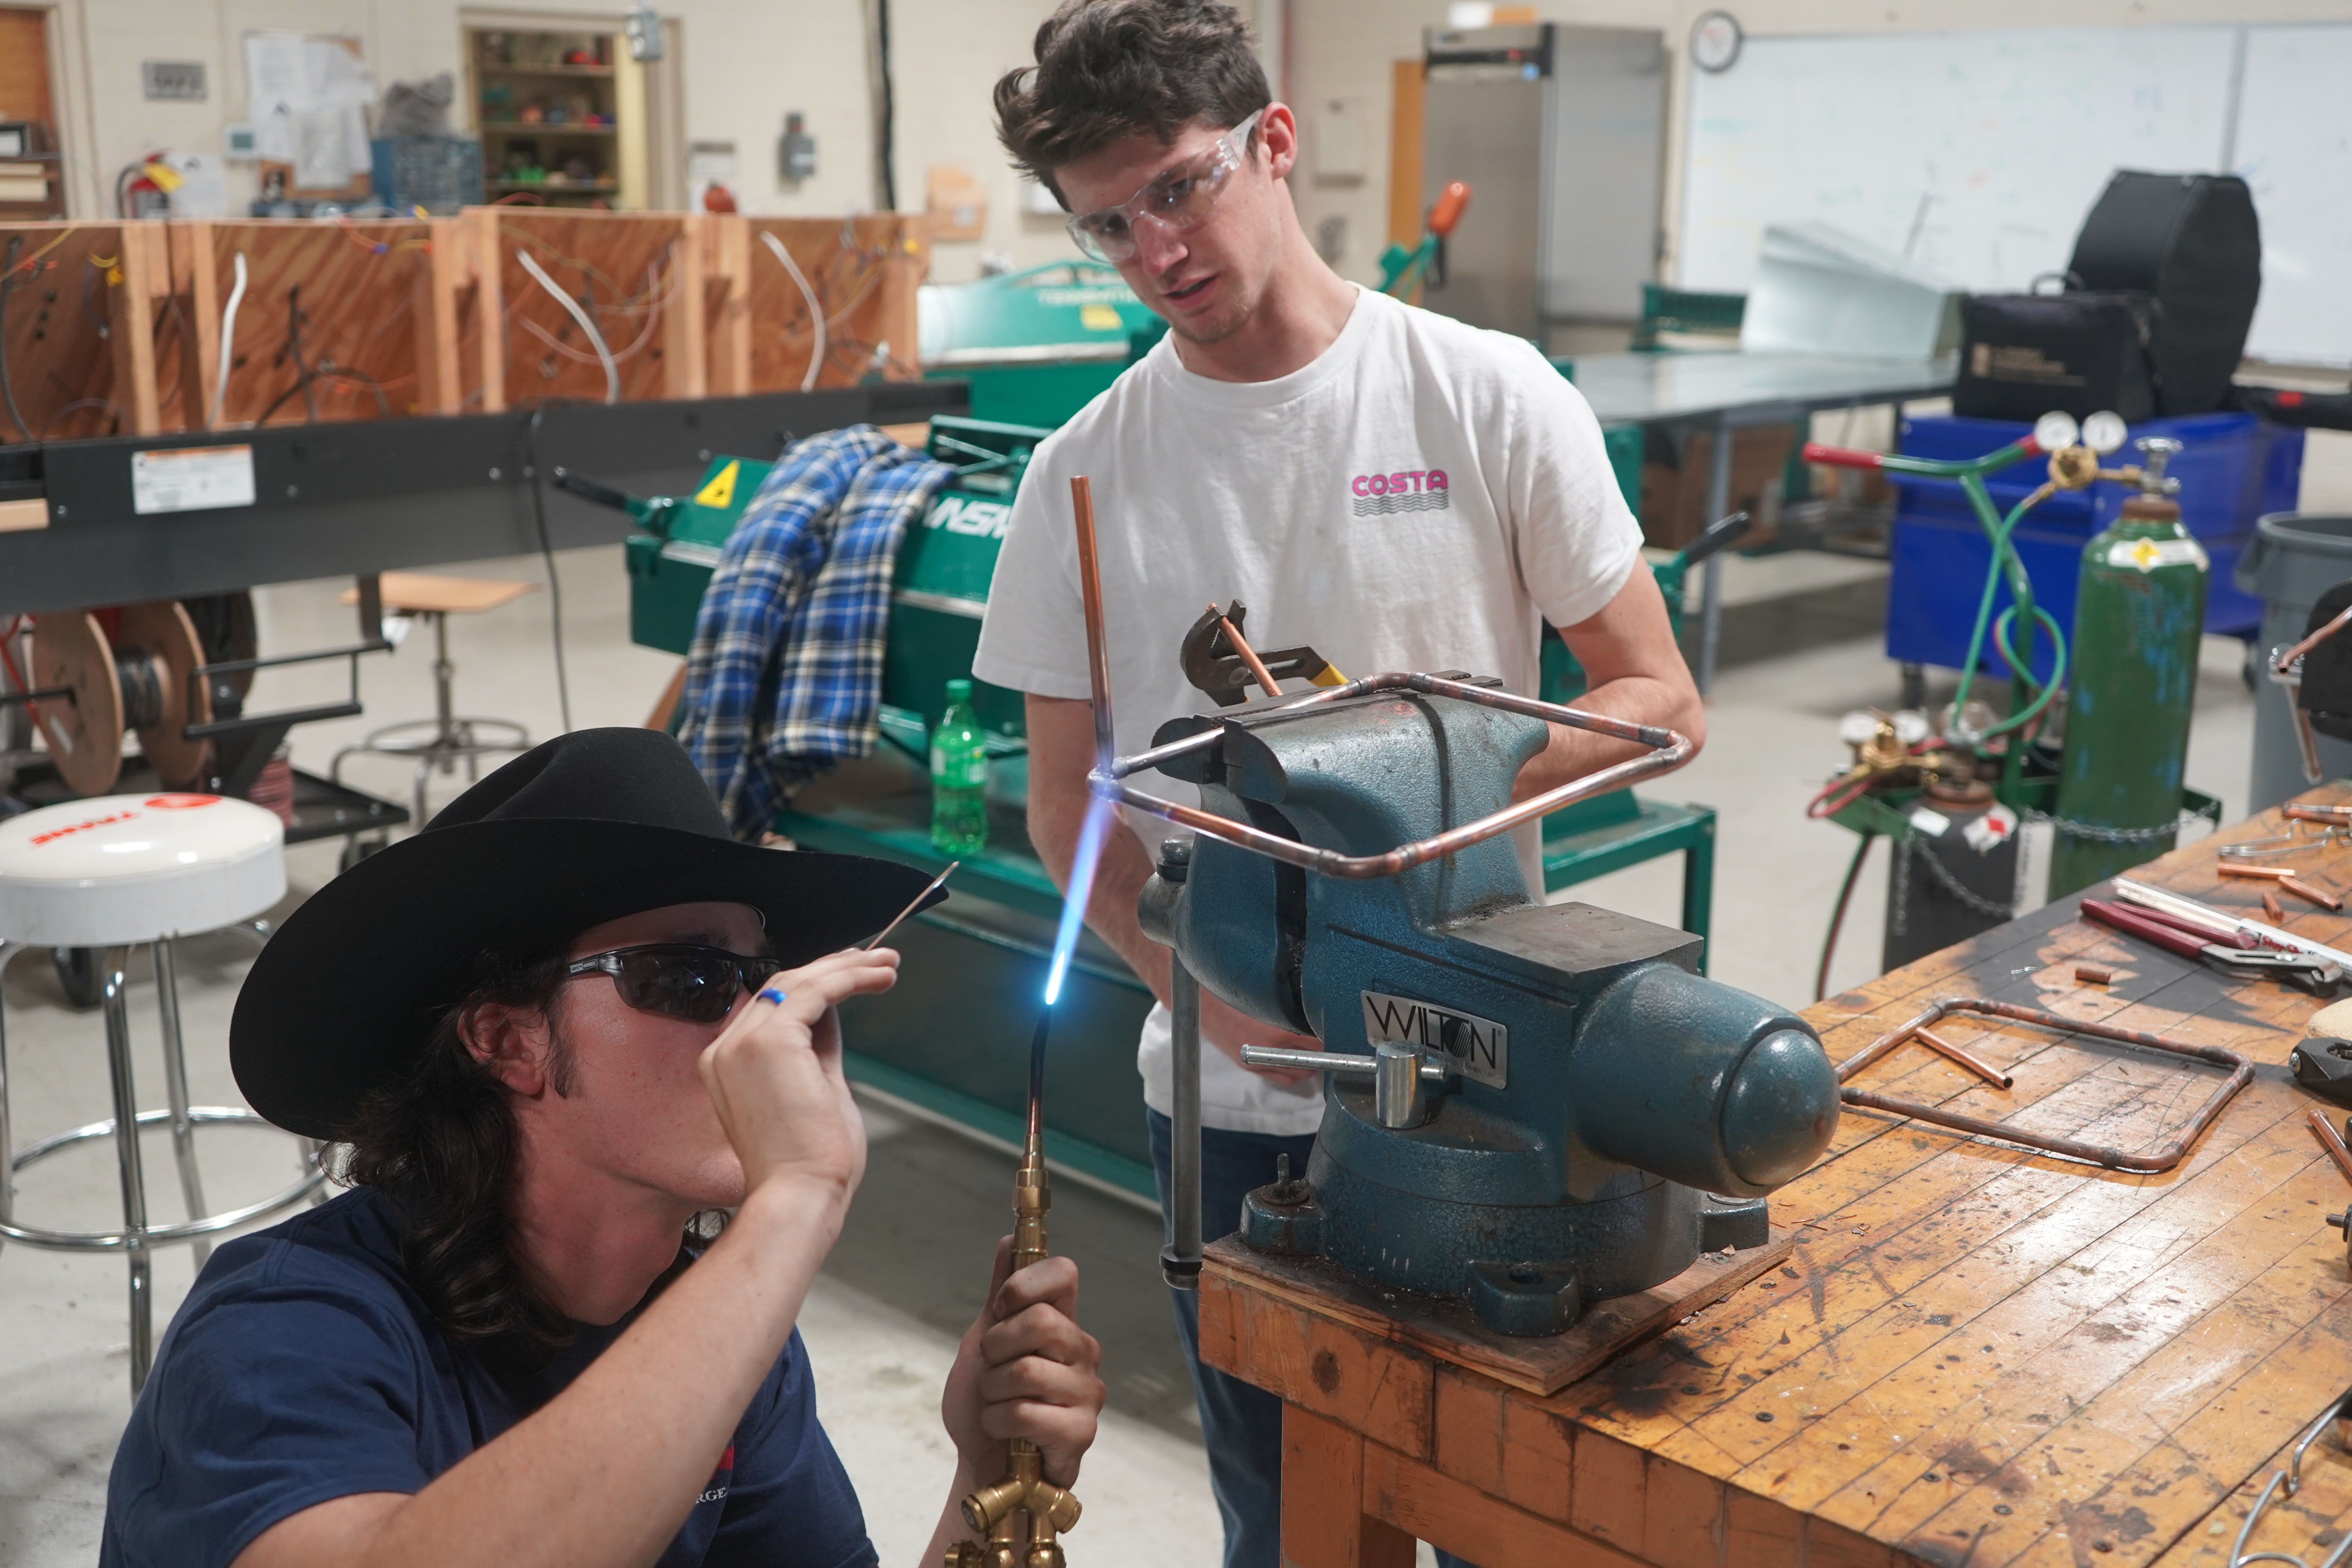 GNTC Air Conditioning Technology students Ben Stevenson (left) and Gabe Chapman (right) give a demonstration on brazing copper pipes during Industrial Career Day.